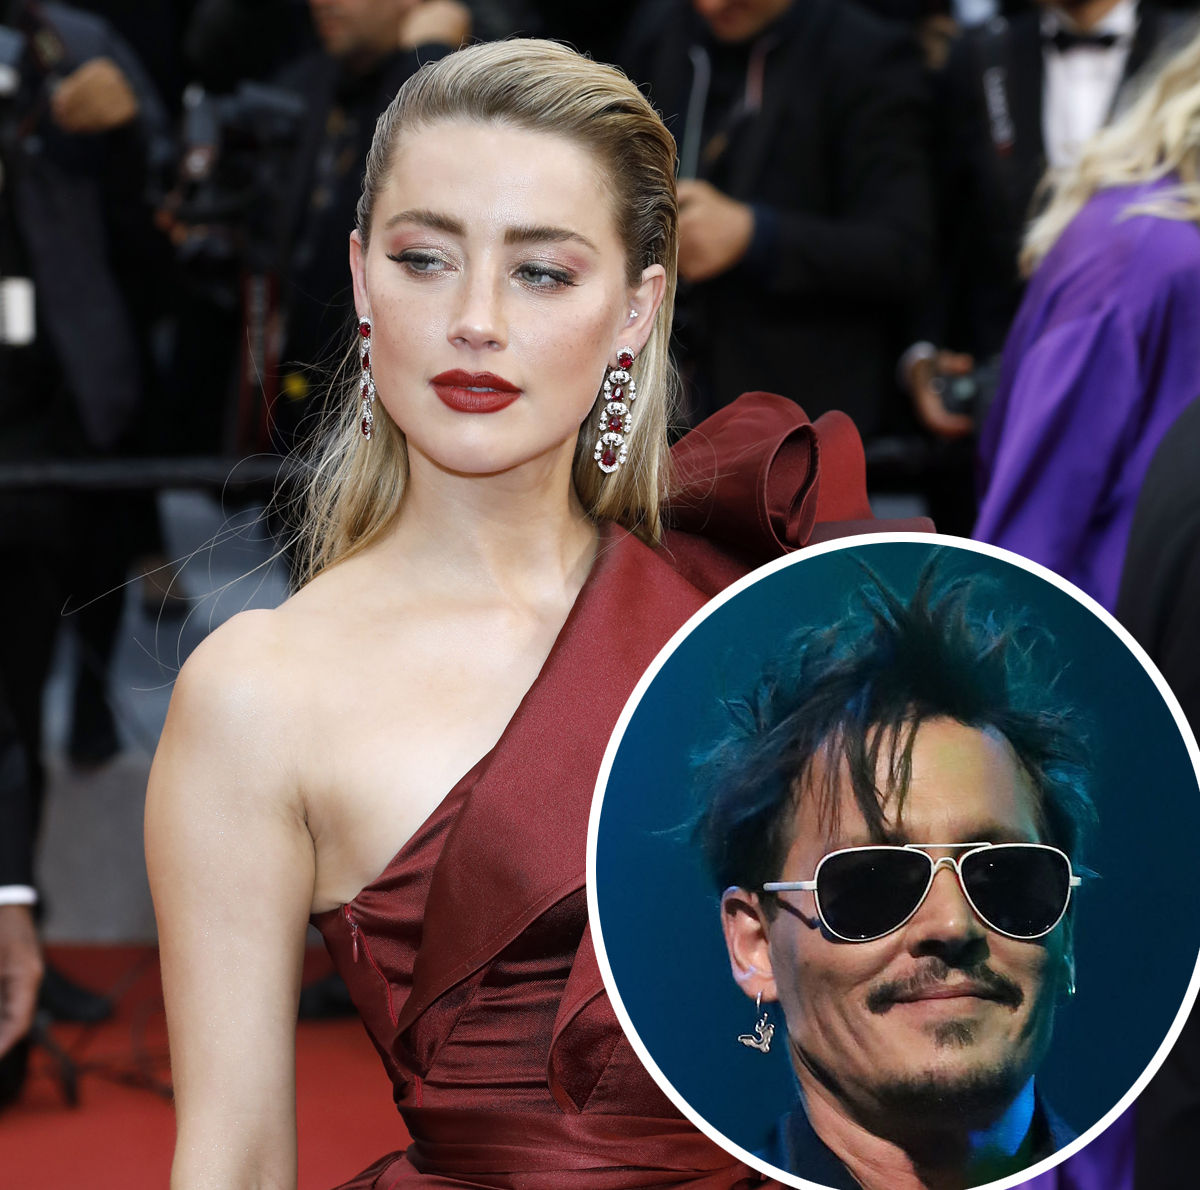 Amber Heard #39 s #39 Friend #39 Defends Johnny Depp Claims She #39 Never Saw #39 The